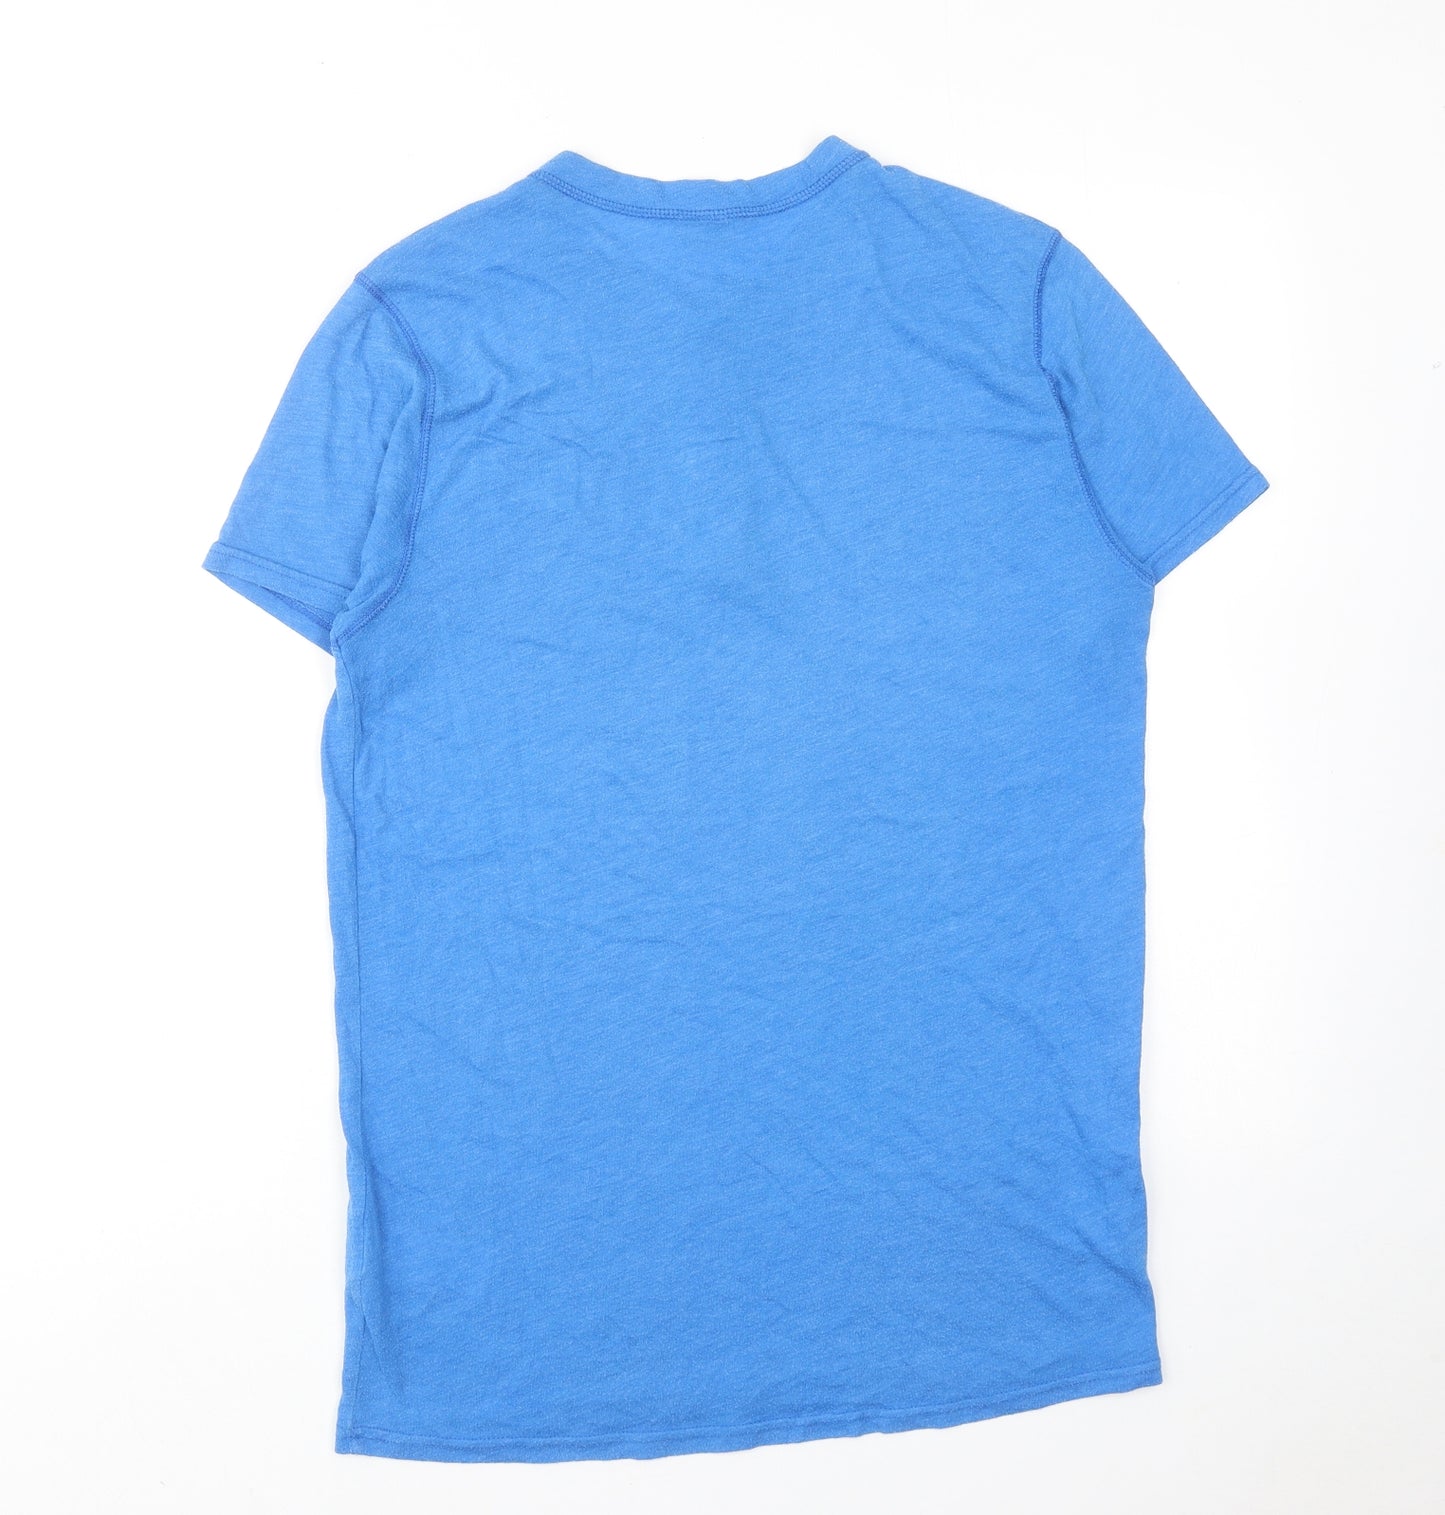 Hollister Mens Blue Polyester T-Shirt Size S Round Neck